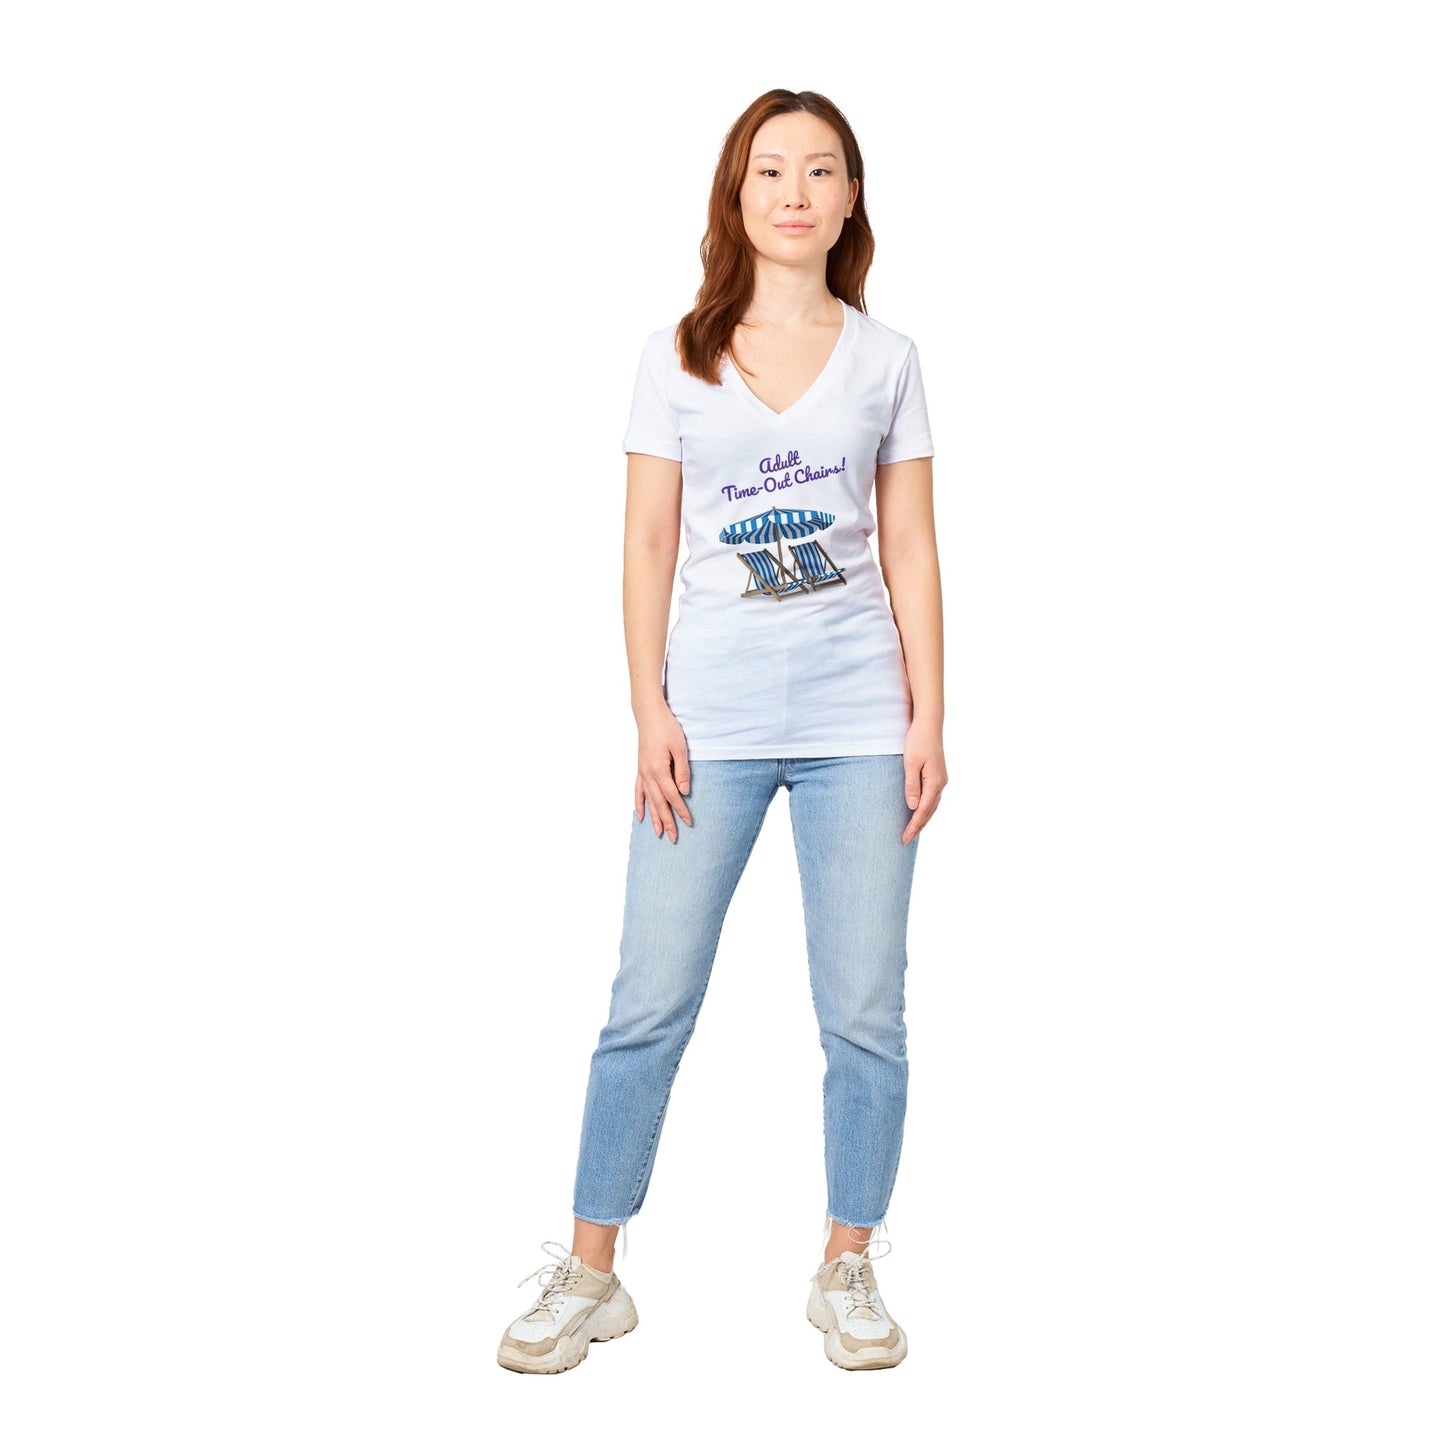 A premium women’s V-neck t-shirt from combed and ring-spun cotton original Adult Time-Out Chairs! on front worn by a dark-haired Asian female model standing.